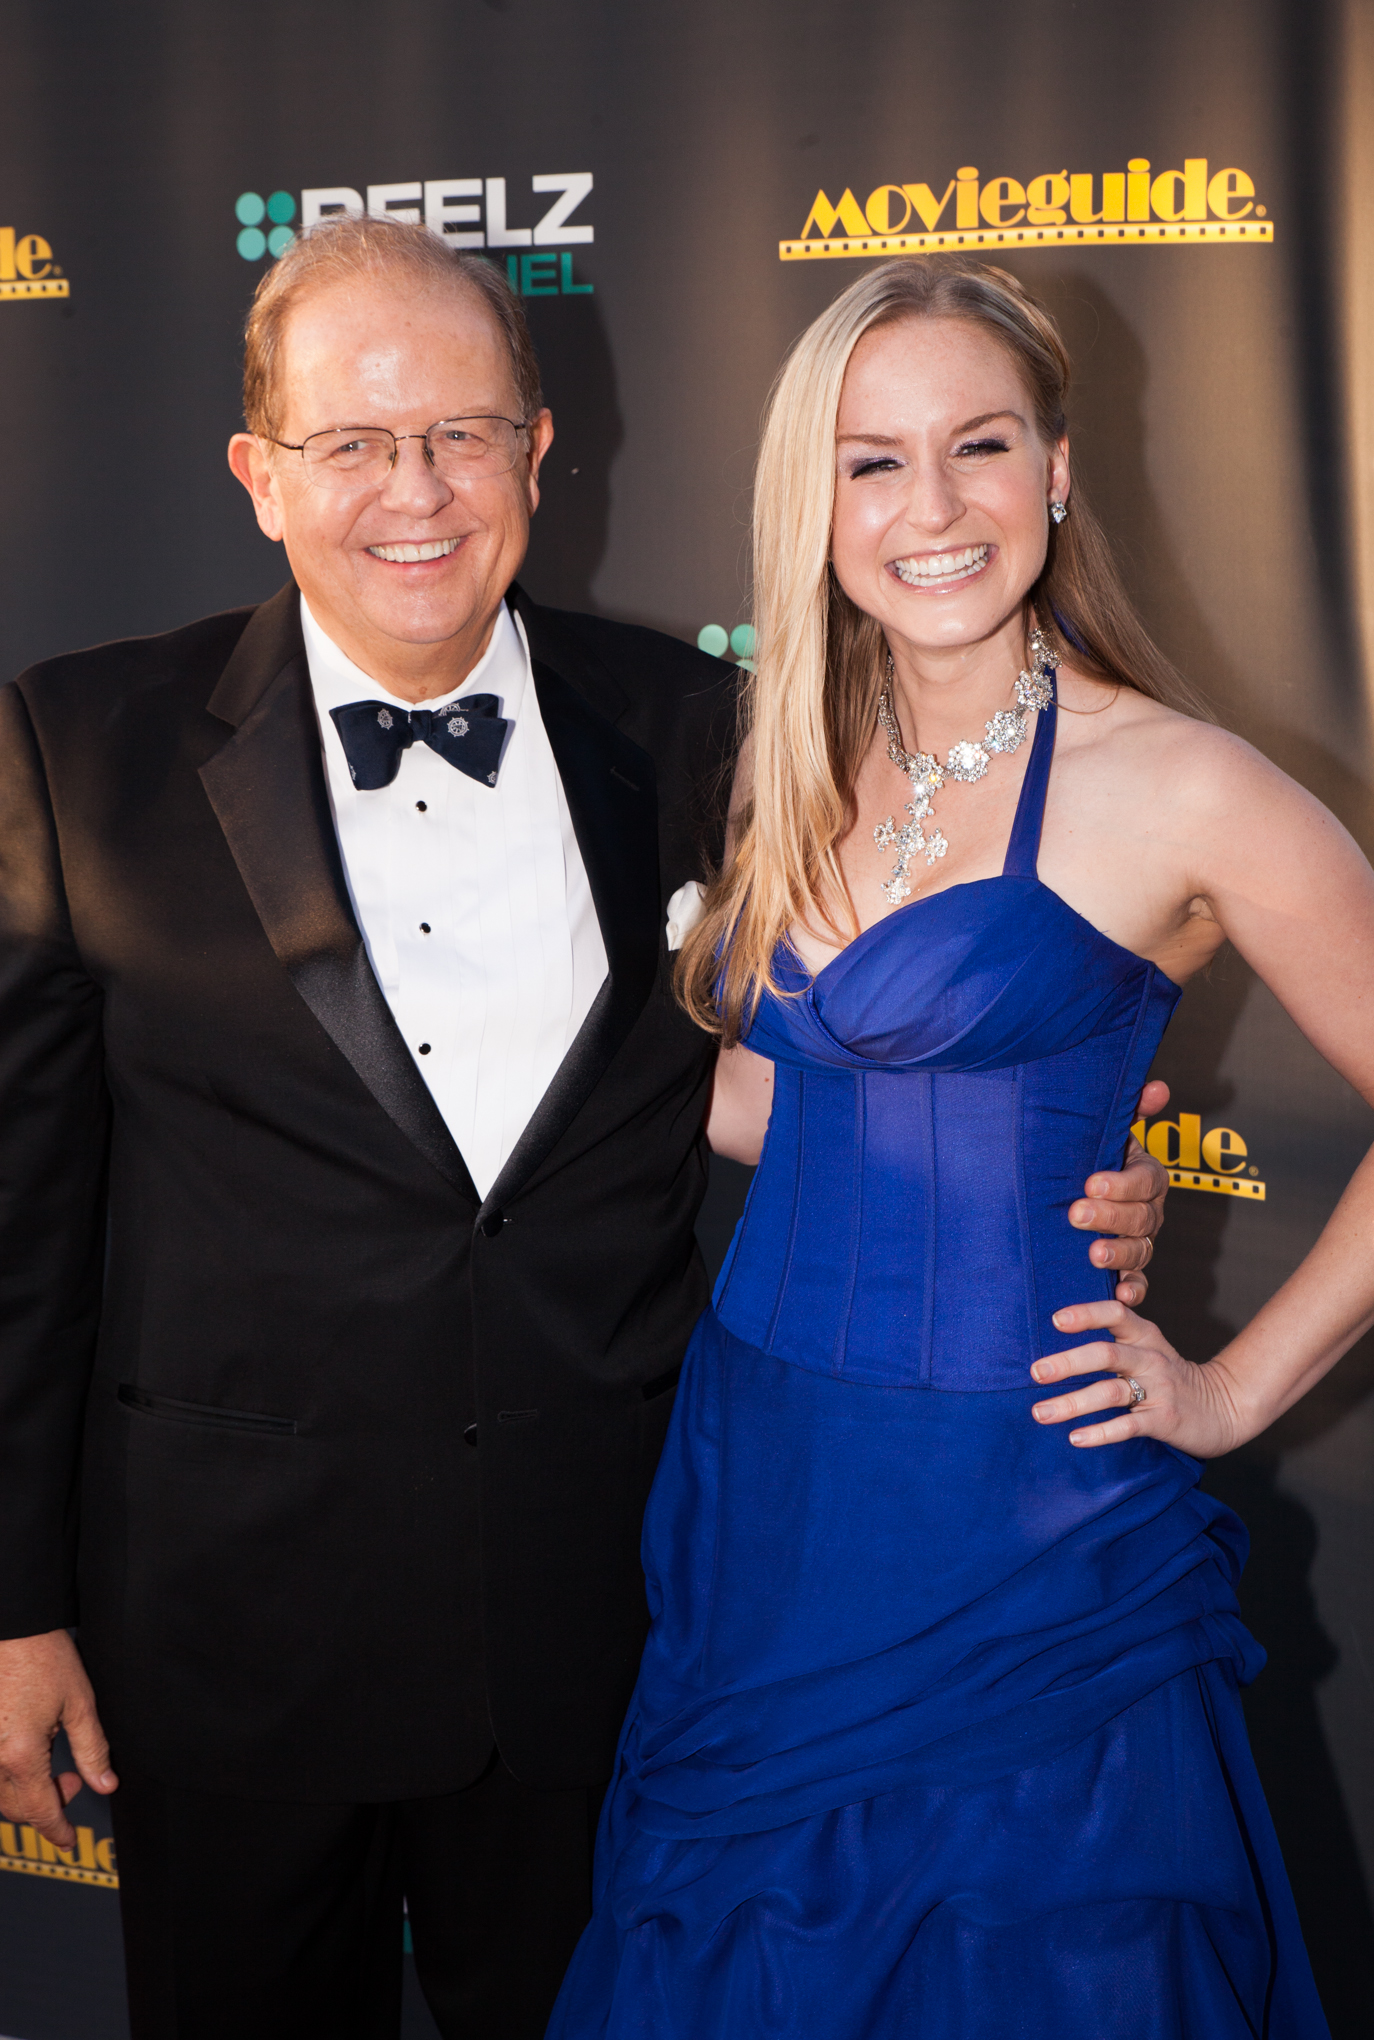 Founder Dr. Ted Baehr and actress Jenn Gotzon attend the 22nd Annual Movieguide Awards at Universal Hilton on Feb 7, 2014